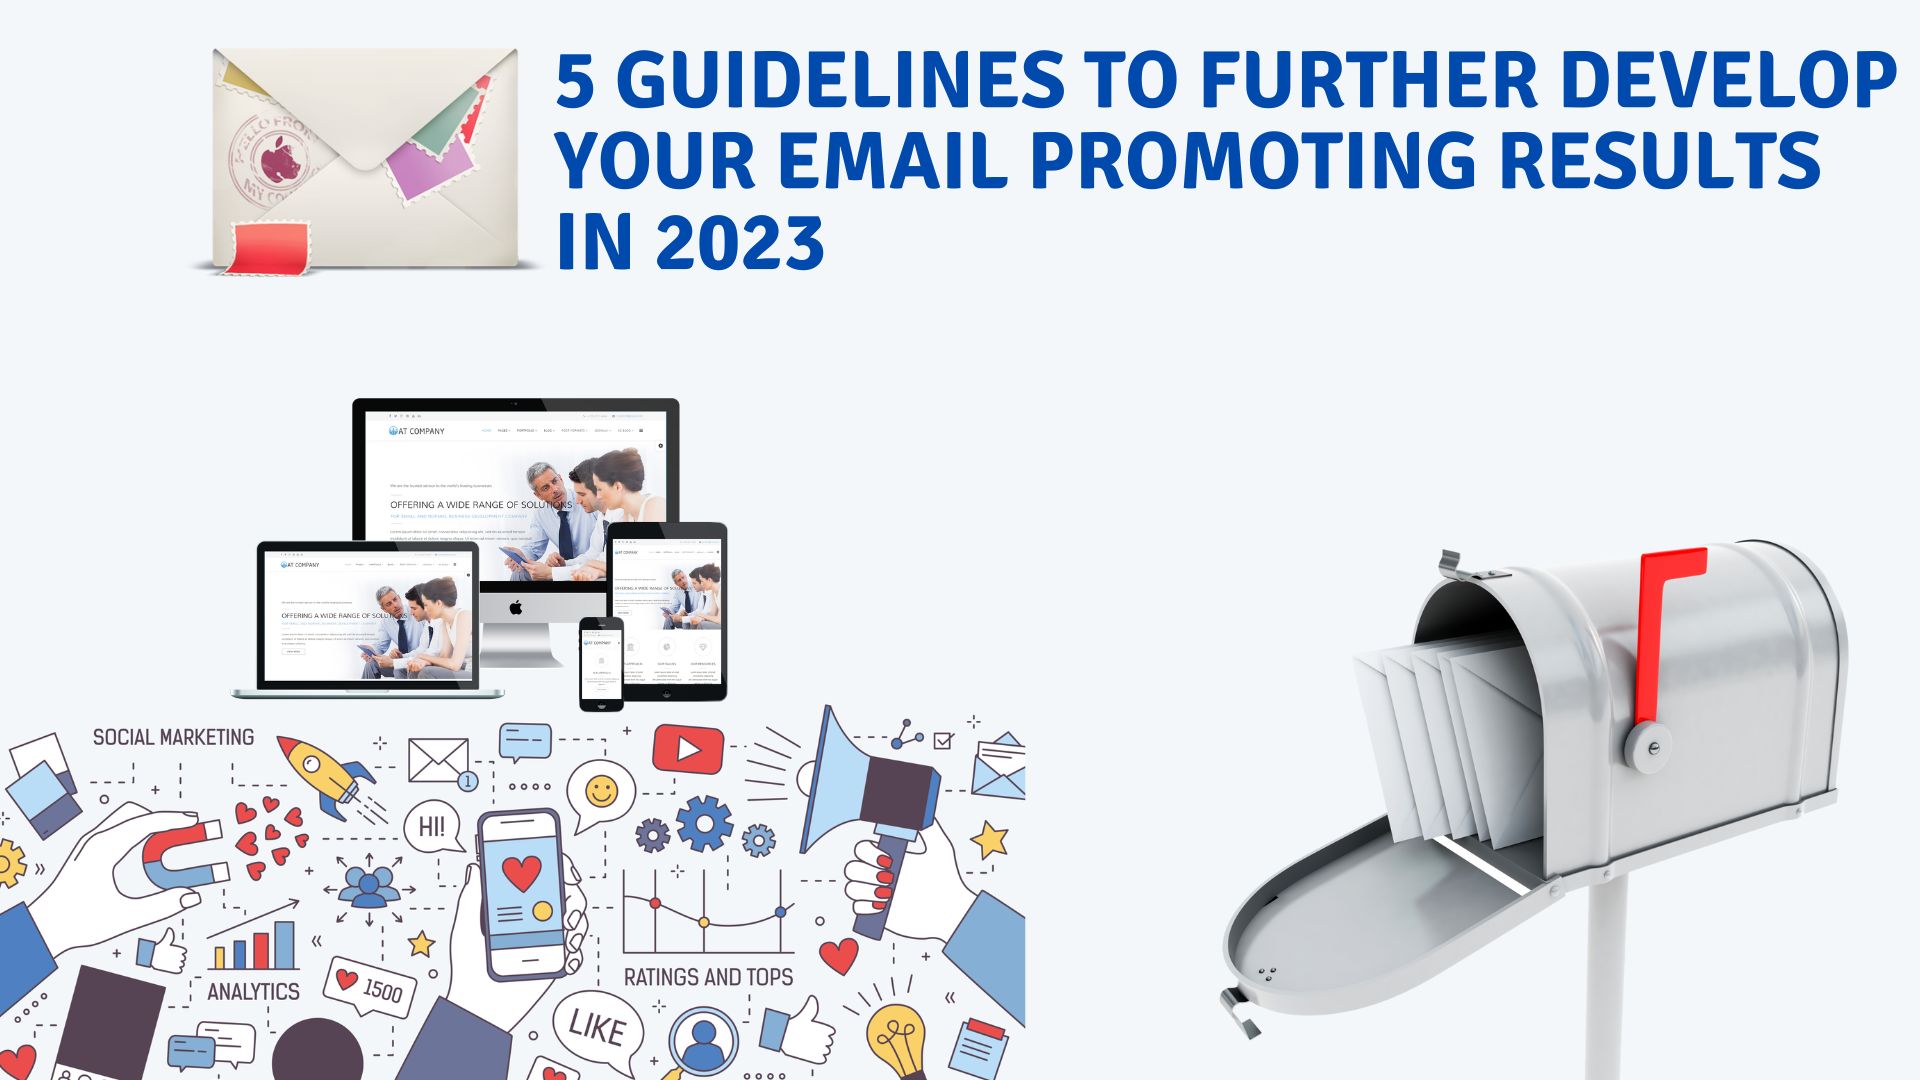 5 guidelines to further develop your email promoting results in 2023